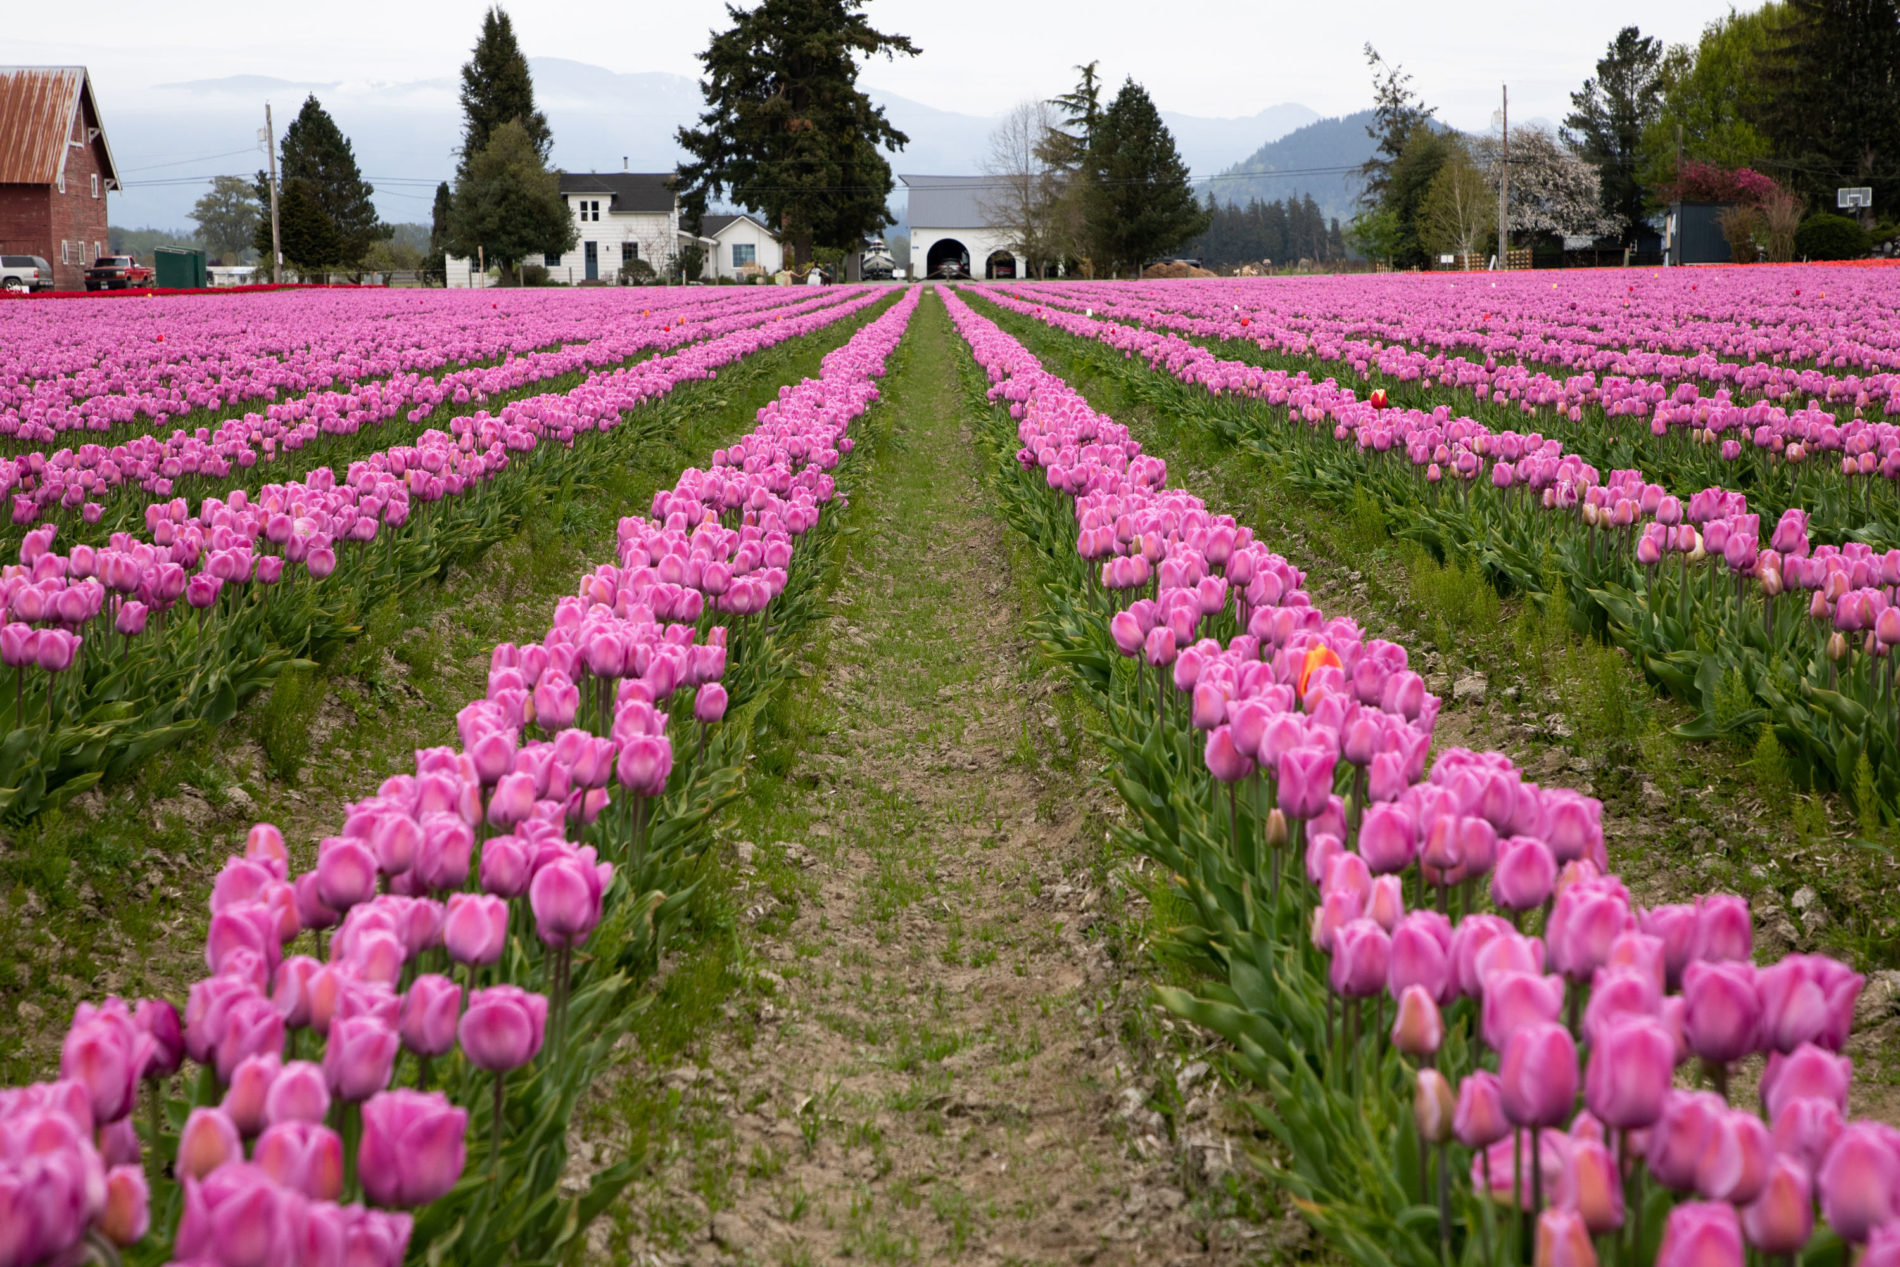 Bright lavender tulips lead up to a beautiful white farmhouse in Skagit Valley.